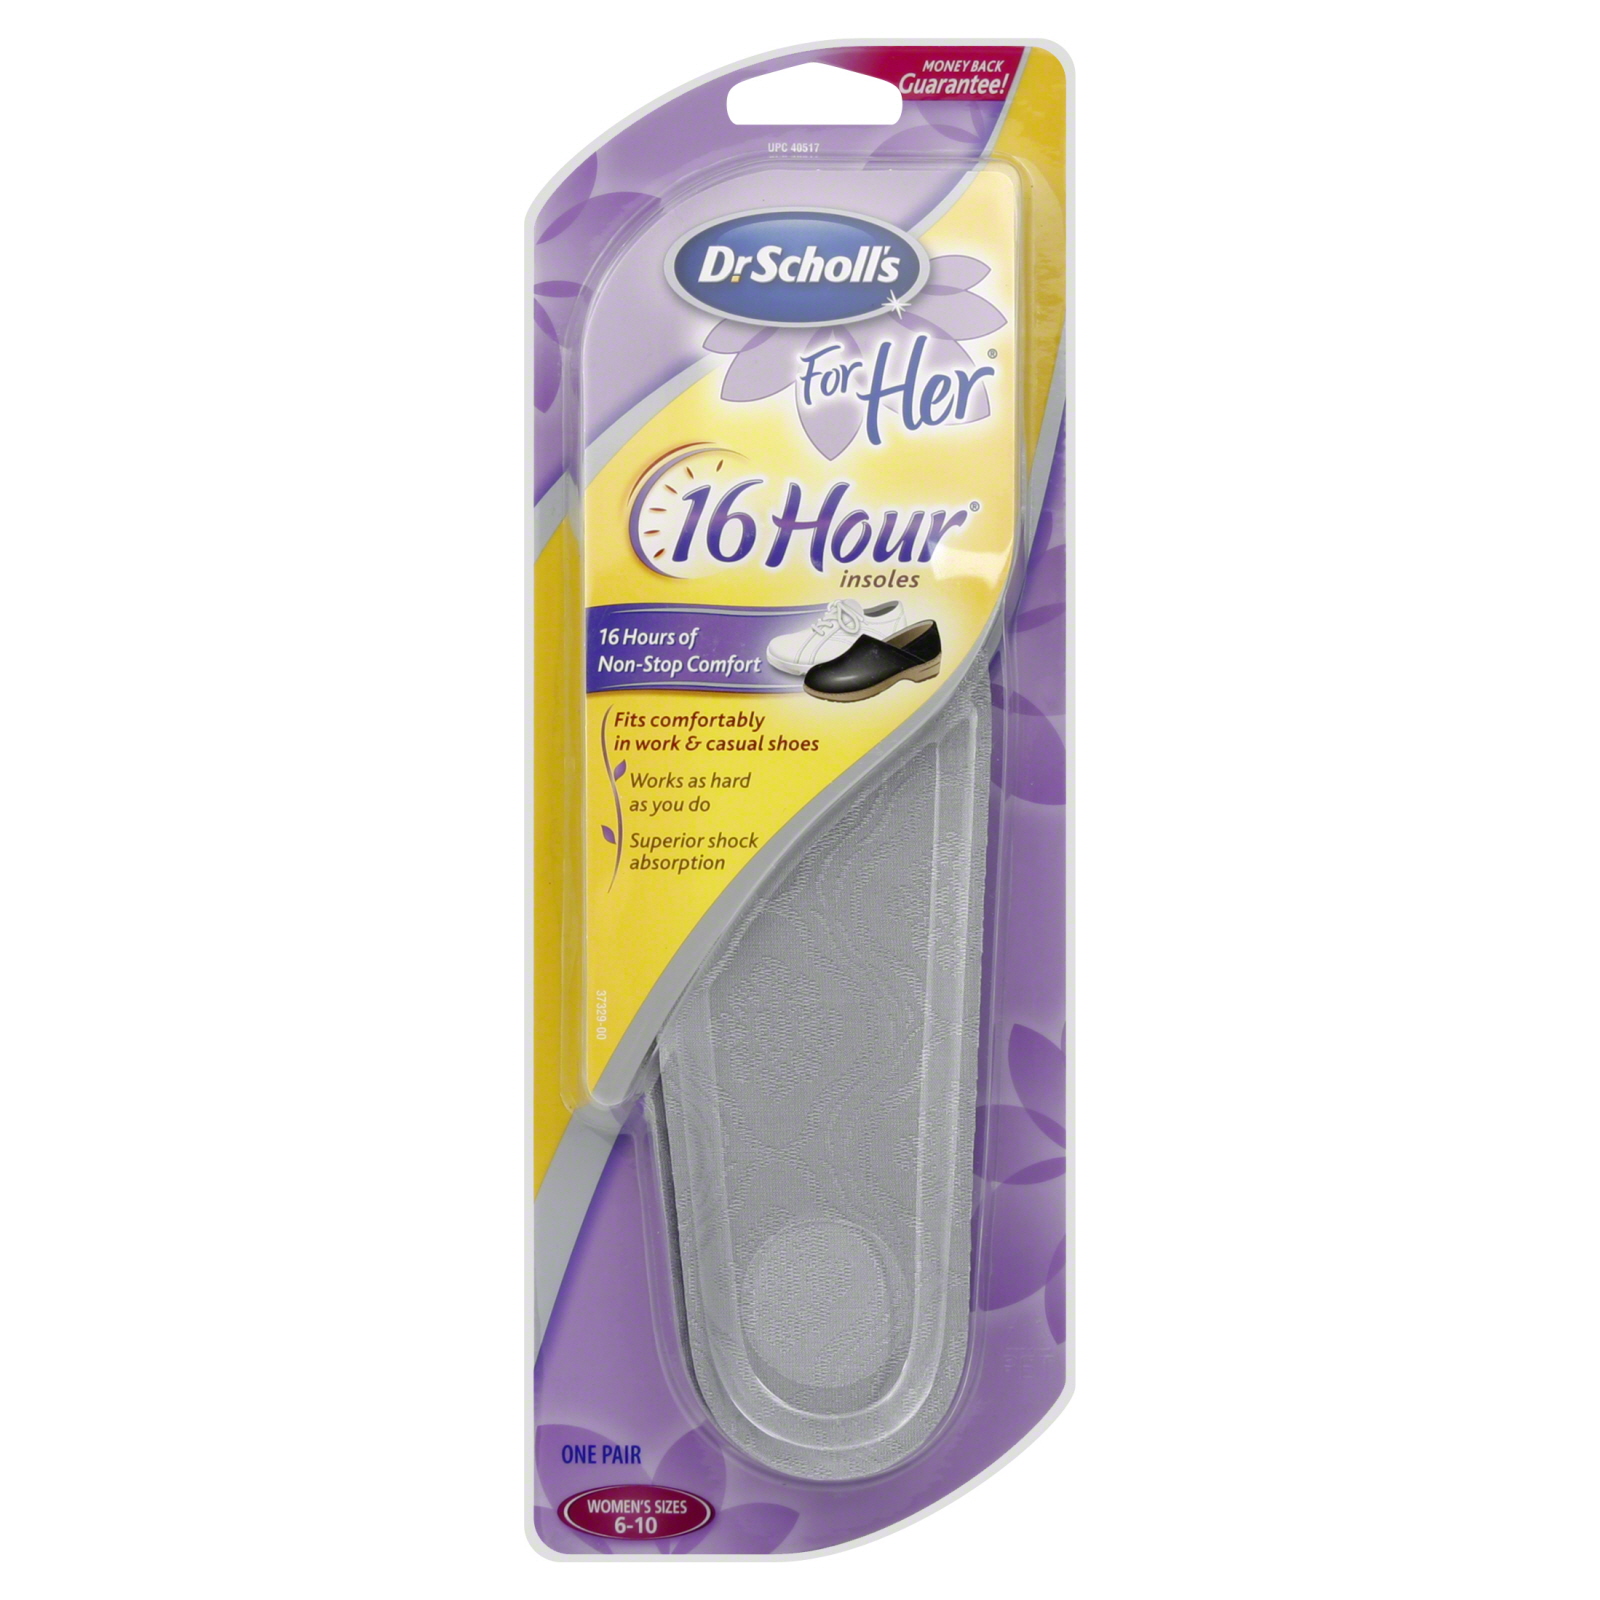 Dr. Scholl's For Her 18 Hour Insoles, Women's Sizes 6 - 10, 1 pair